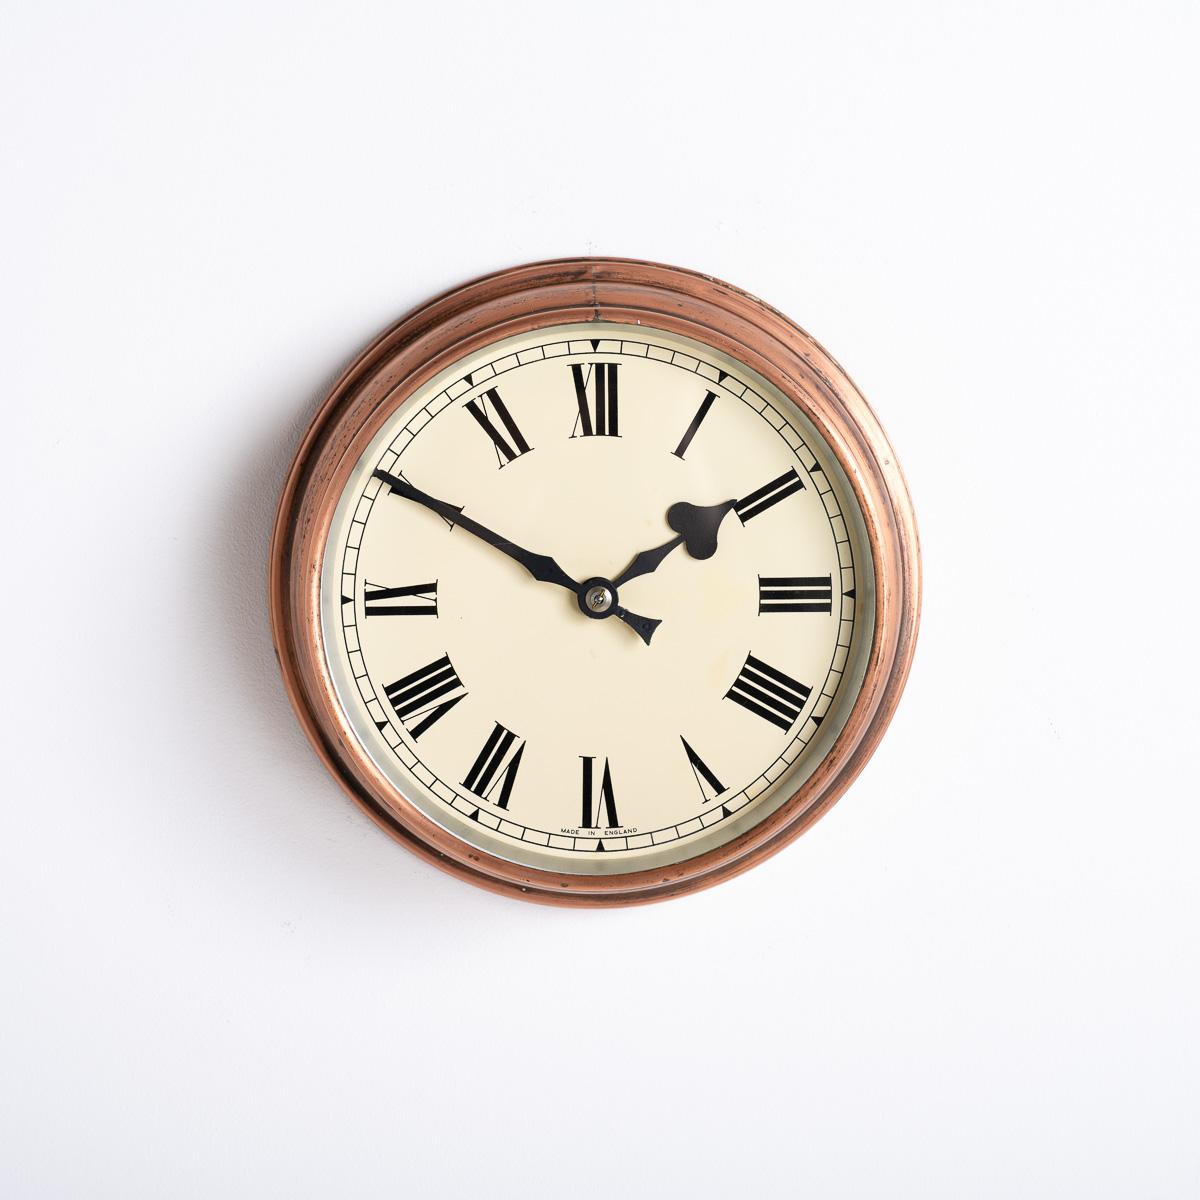 British Reclaimed Industrial Aged Spun Copper Case Wall Clock By Synchronome